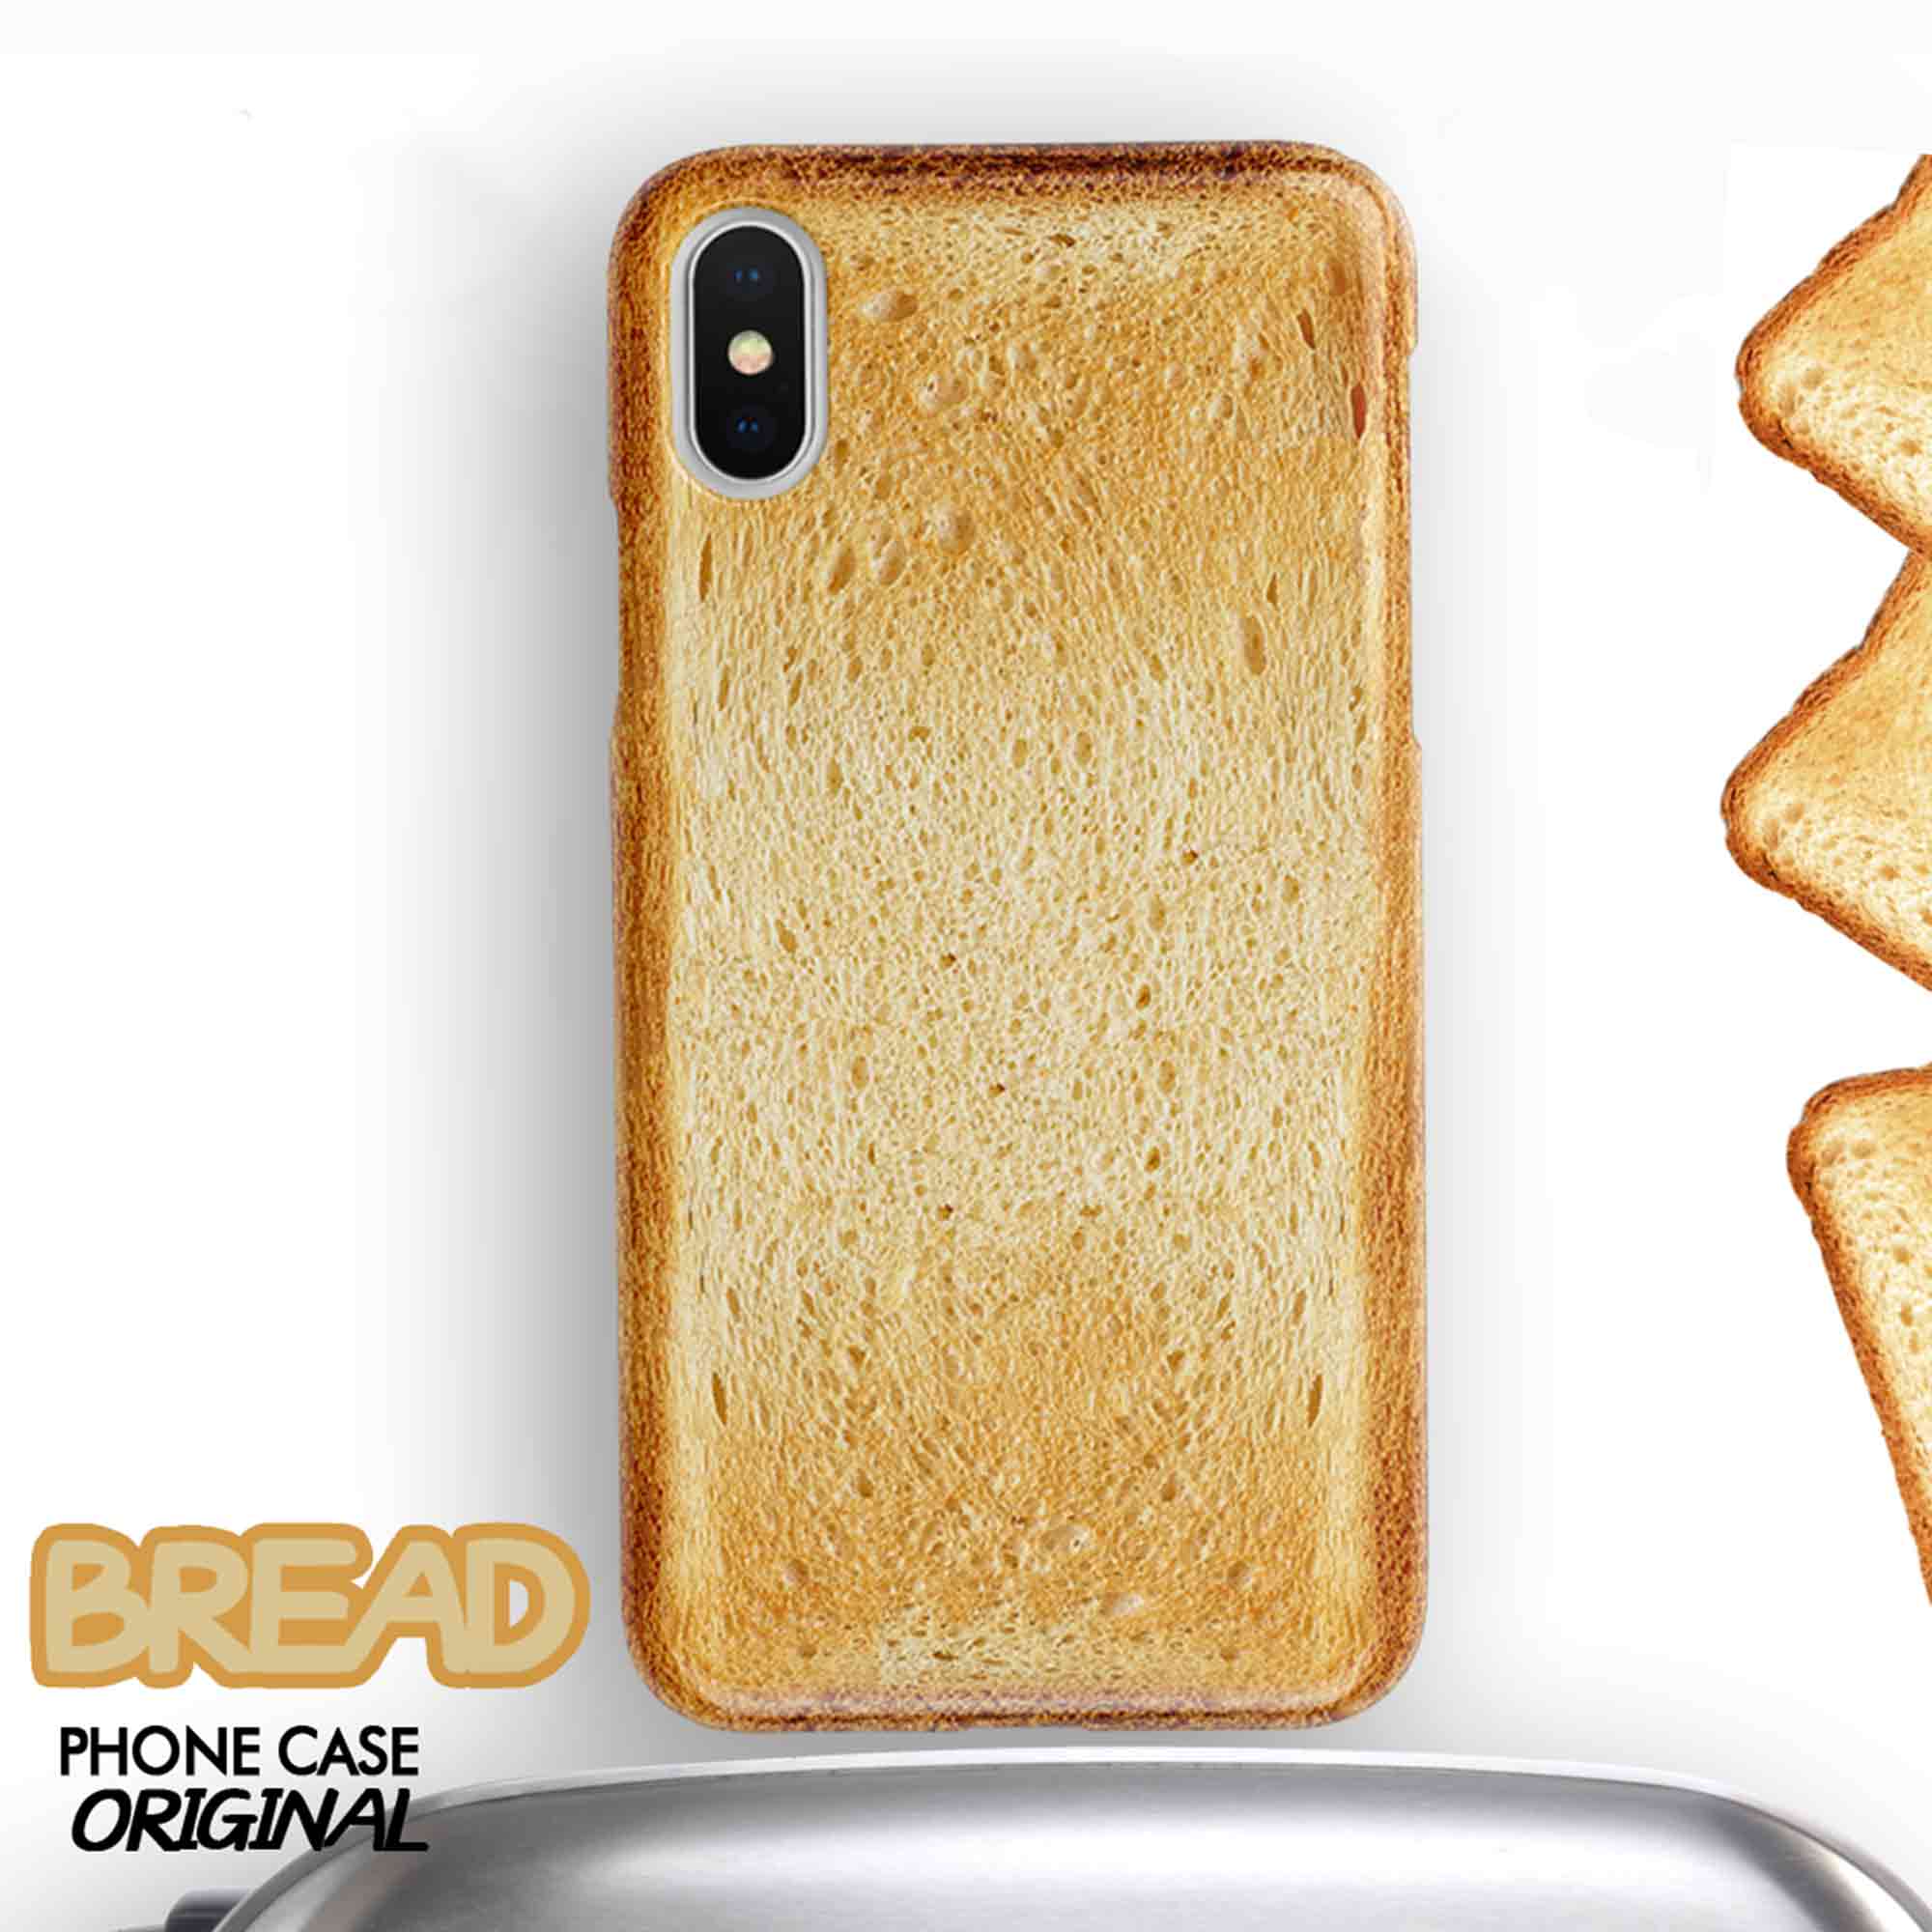 Toast Wood Cover for iPhone 14, 14 Max, 14 Pro, 14 Pro Max, Toast